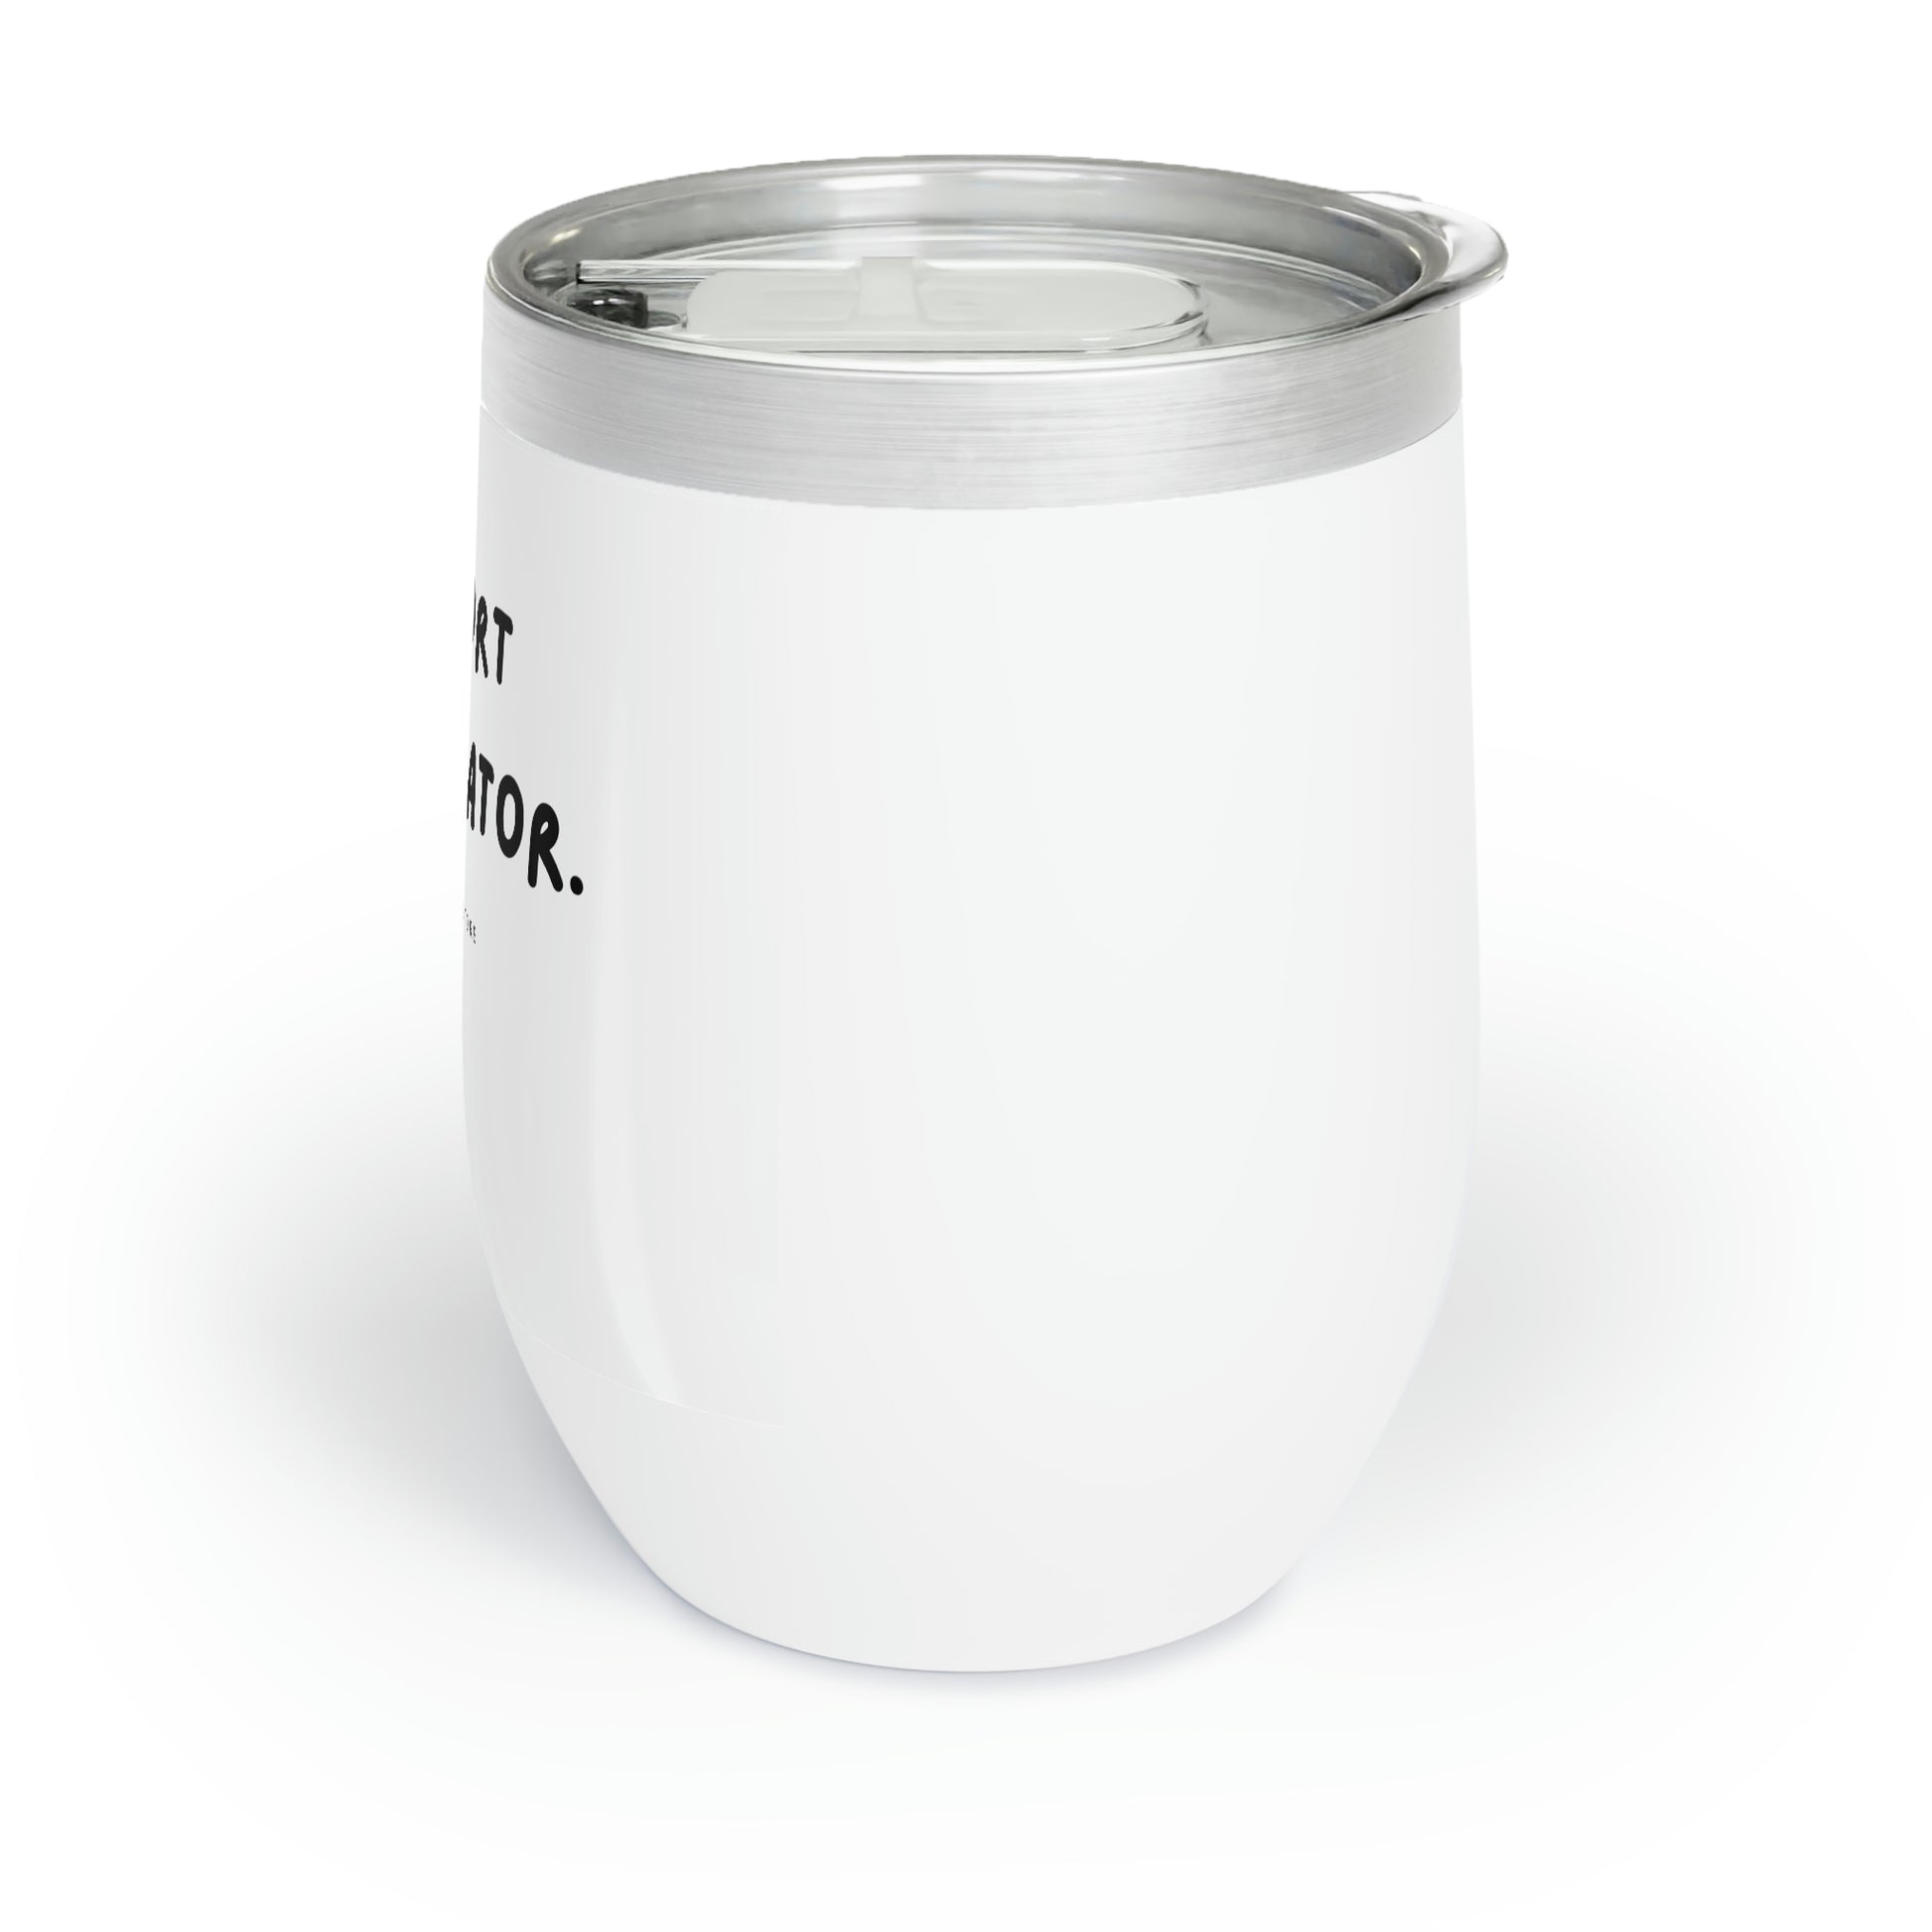 Support Coordinator Chill Wine Tumbler - SupportWorkerStore